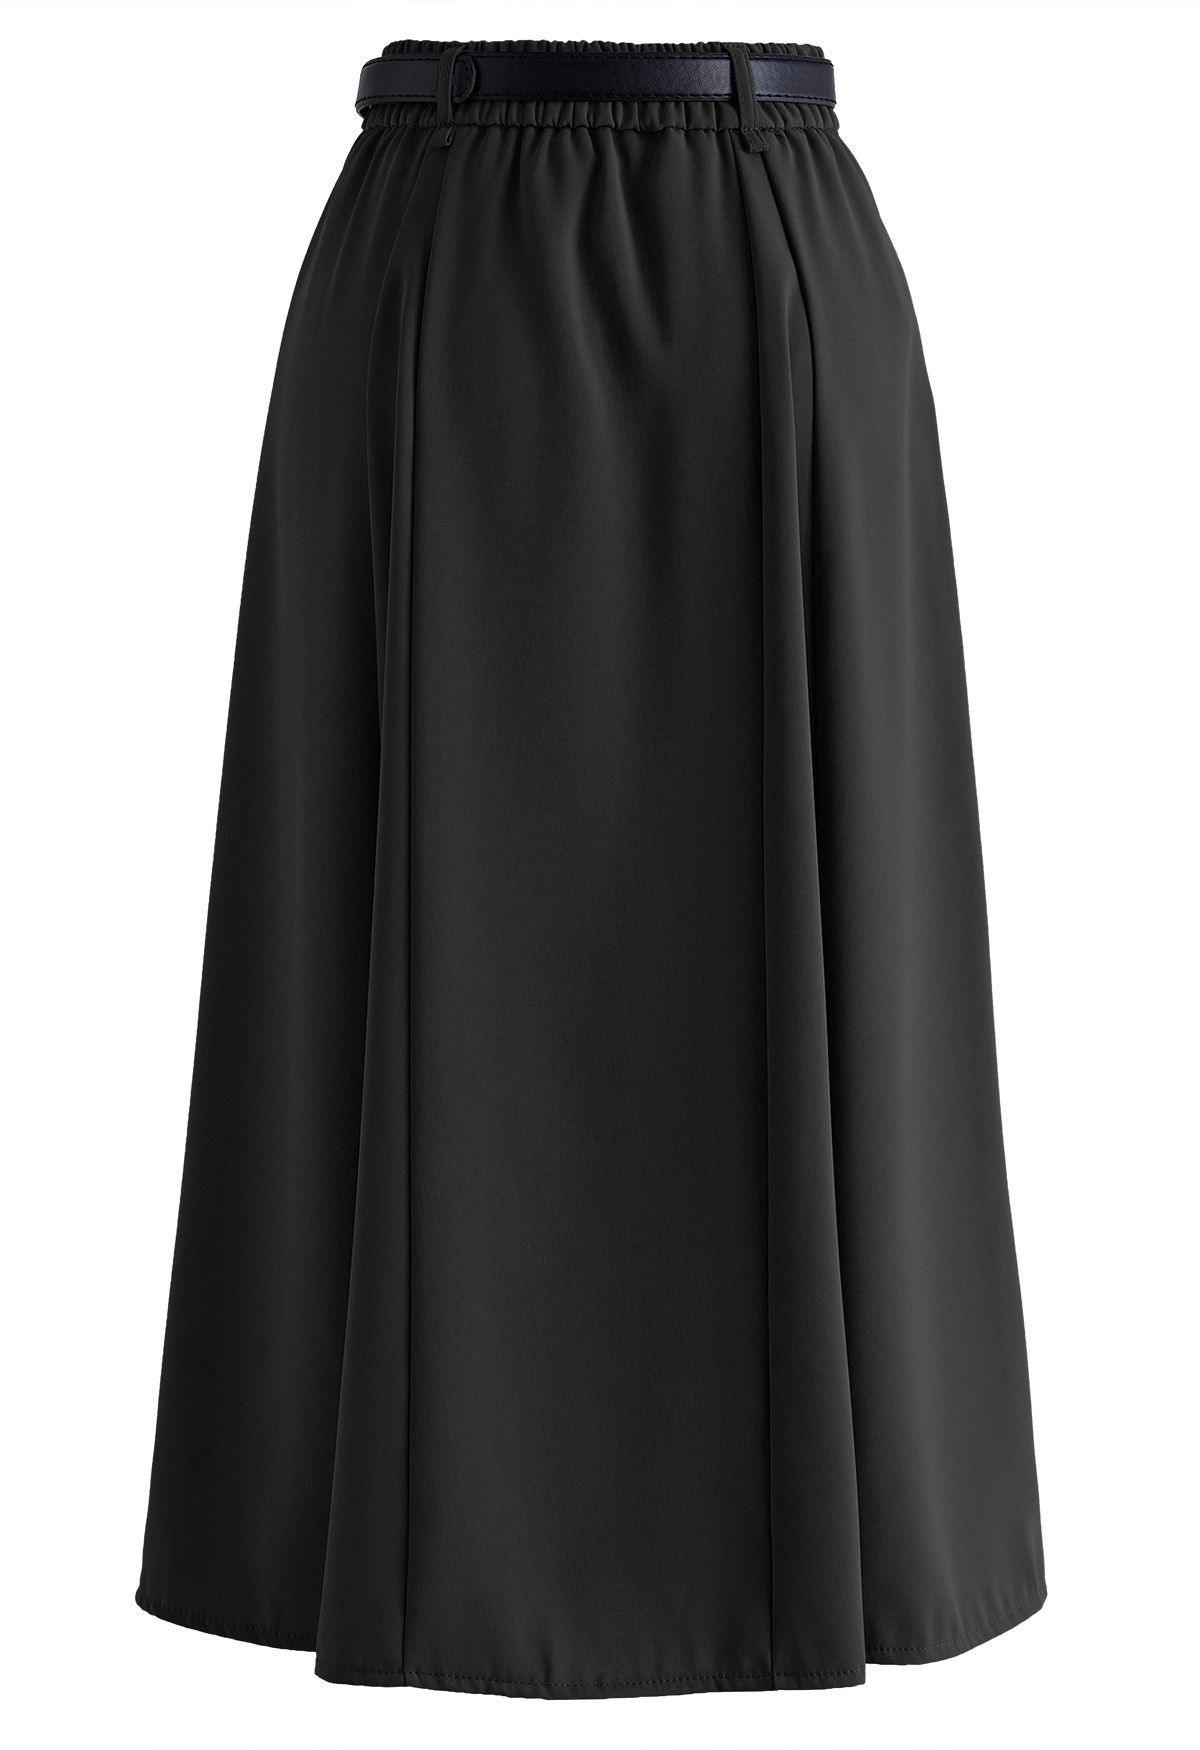 Solid Seam Detailing Belted Skirt in Black - Retro, Indie and Unique ...